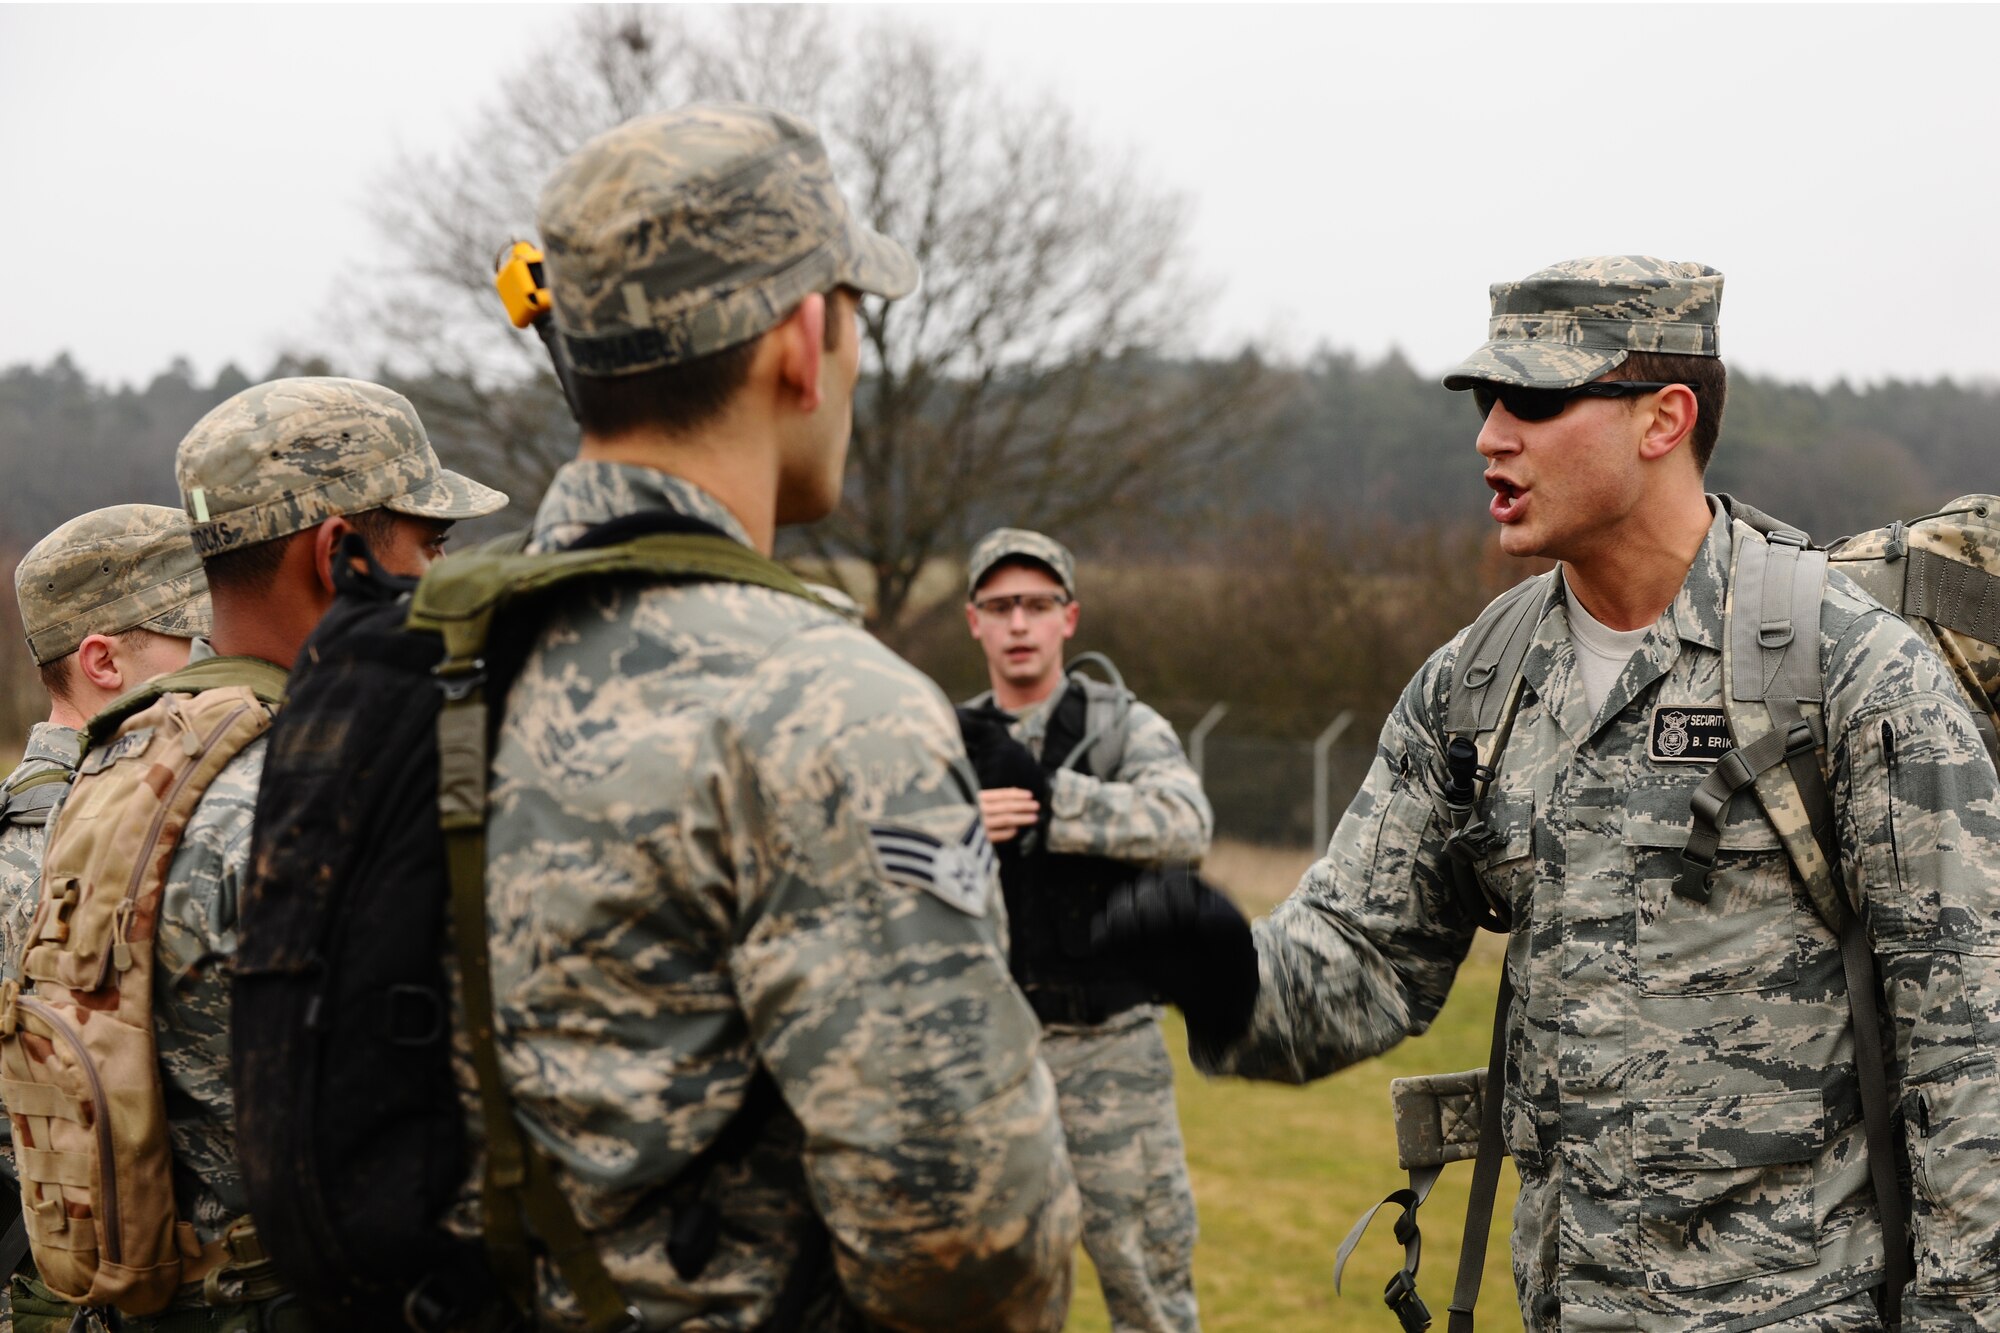 SPANGDAHLEM AIR BASE, Germany – Technical Sgt. Blake Eriksen, 52nd Security Forces Squadron Combat Arms Training and Maintenance instructor, gives commands to Airmen participating in the patrolling training portion of the Ranger training course in a field next to Perimeter Road here March 3. The three-day course prepares Airmen for what they will be tested on during the U.S. Army Ranger pre-assessment training course. The course tests service members’ physical and mental abilities in a high-stress environment while still helping the Ranger learn new skills and improve existing knowledge. Out of the five Airmen enrolled in the training, Senior Airman Sean Reval, 52nd Security Forces Squadron, and Senior Airman Coty Raphael, 52nd Medical Operations Squadron, were the only participants to qualify to continue on to Ranger pre-assessment training at Sembach Air Base, Germany. (U.S. Air Force photo by Airman 1st Class Dillon Davis/Released)